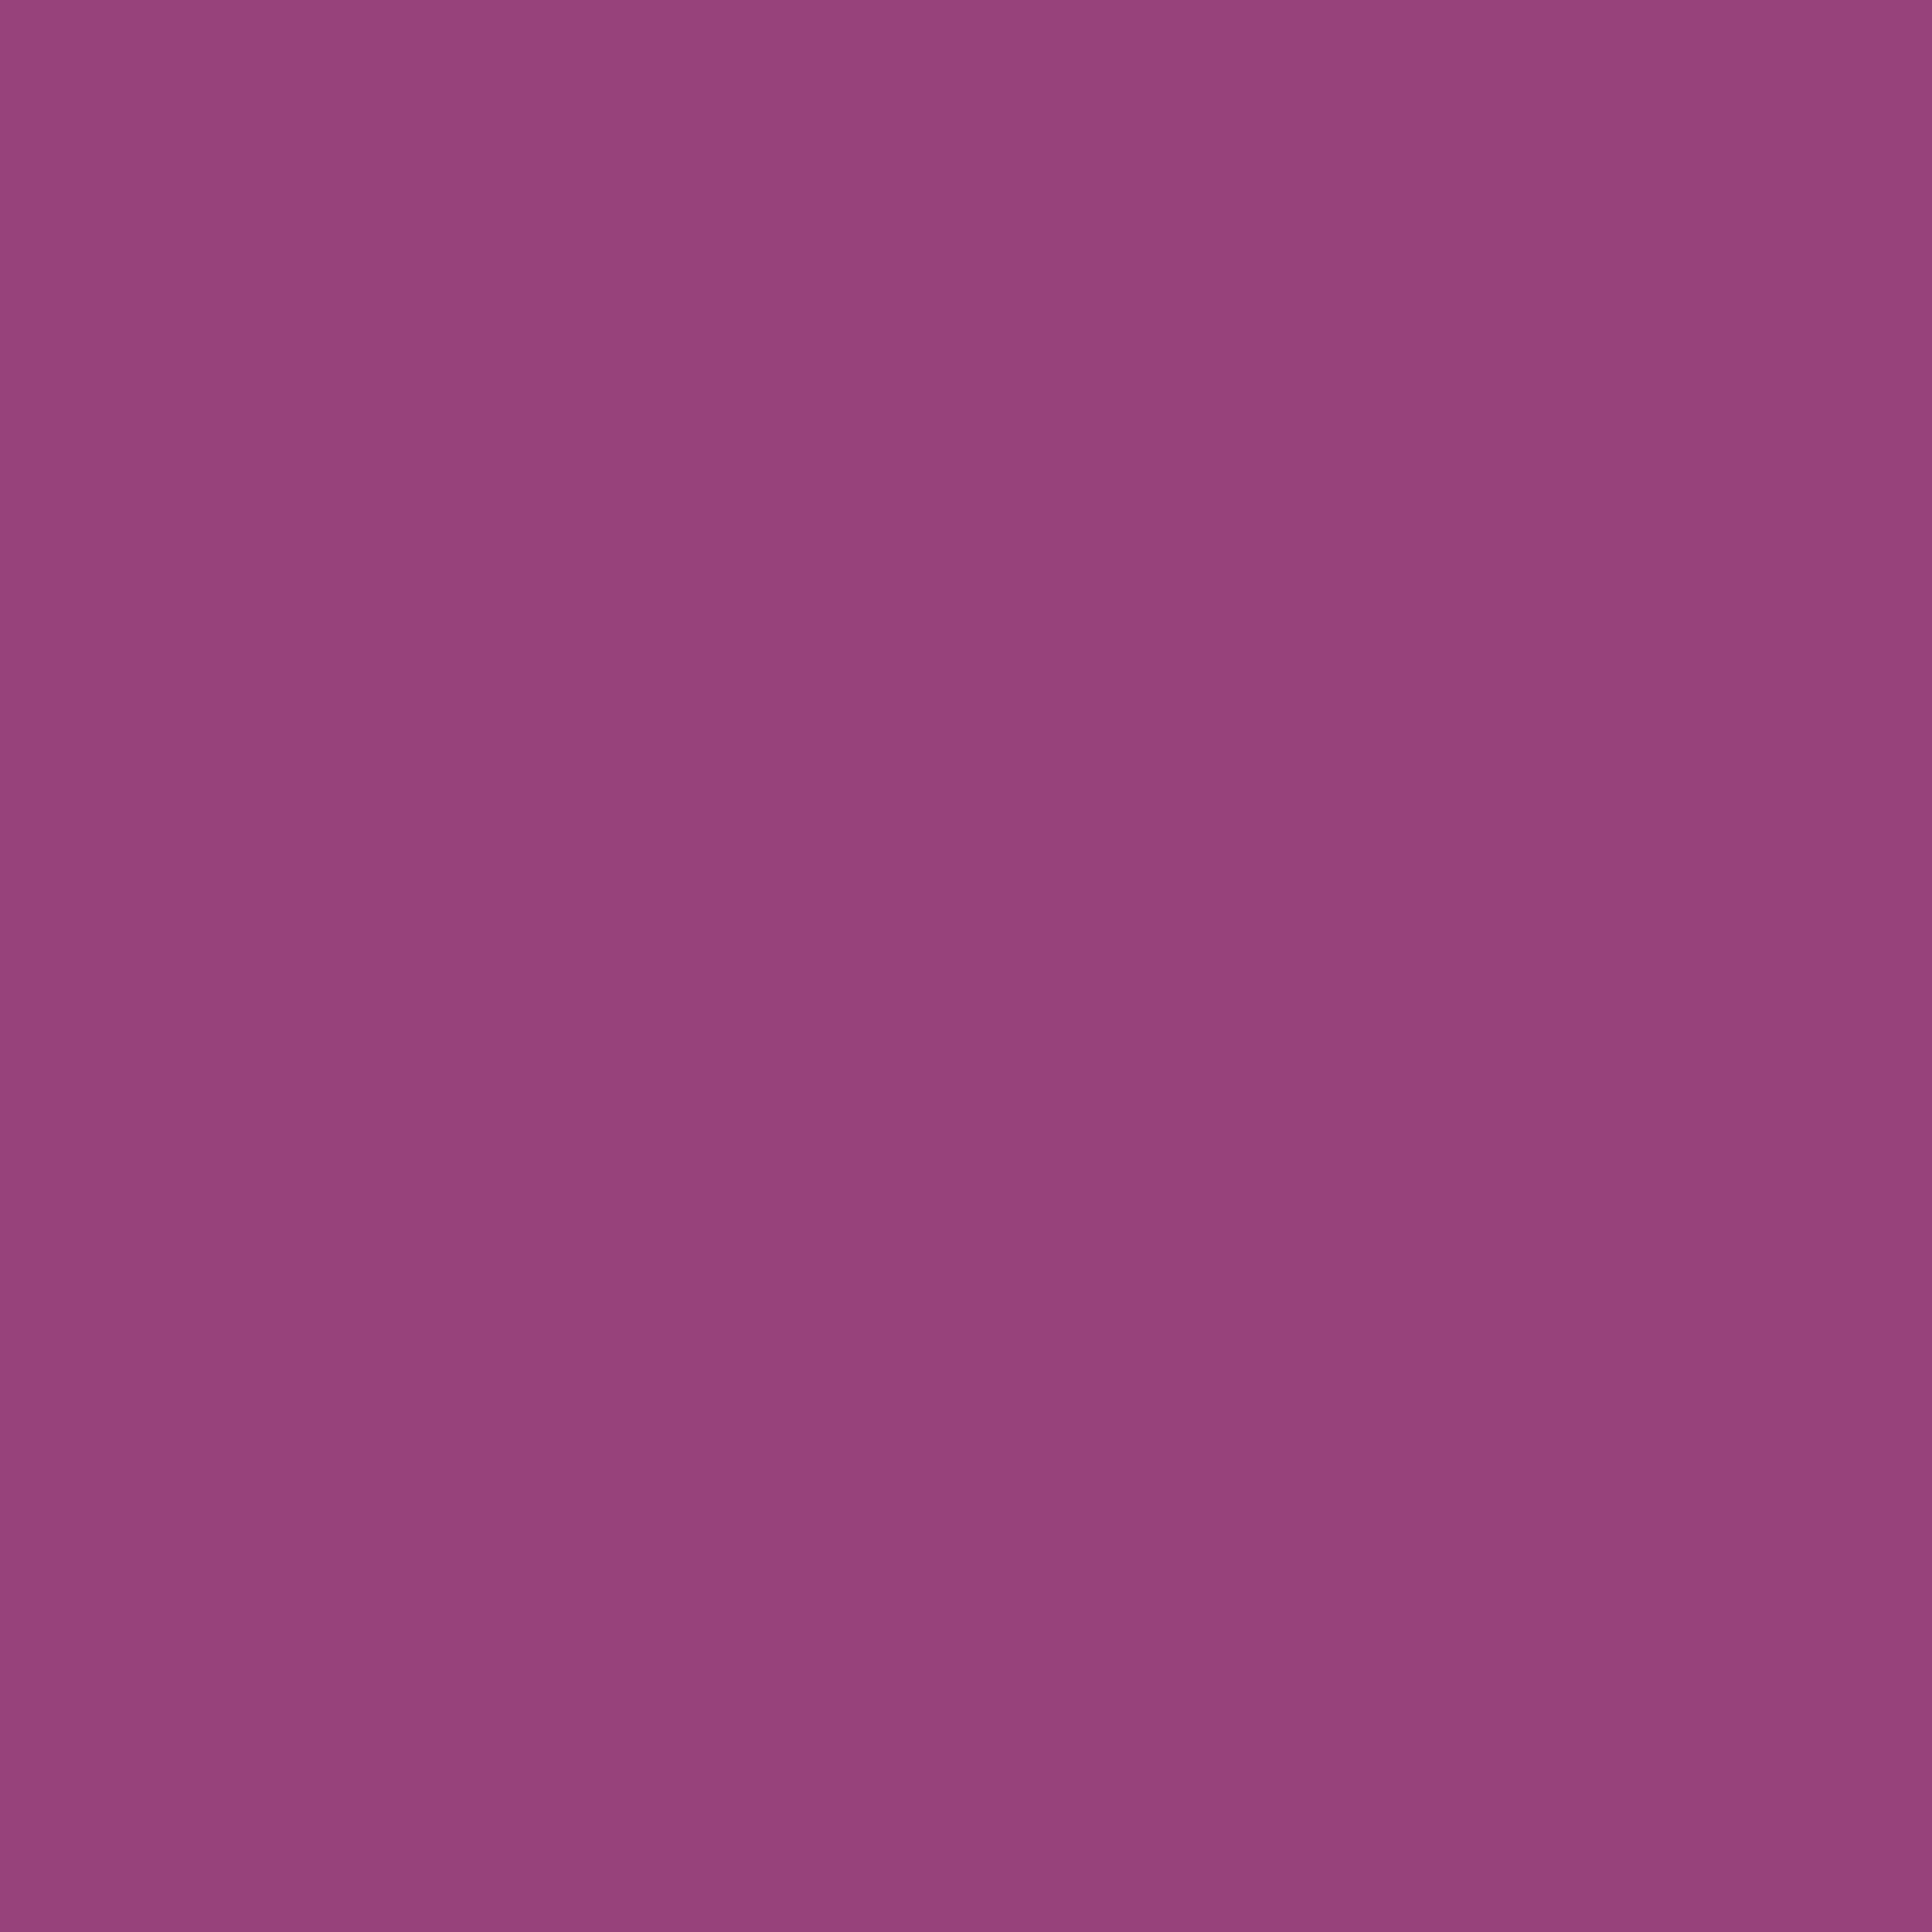 Selected Color is Pretty in Plum